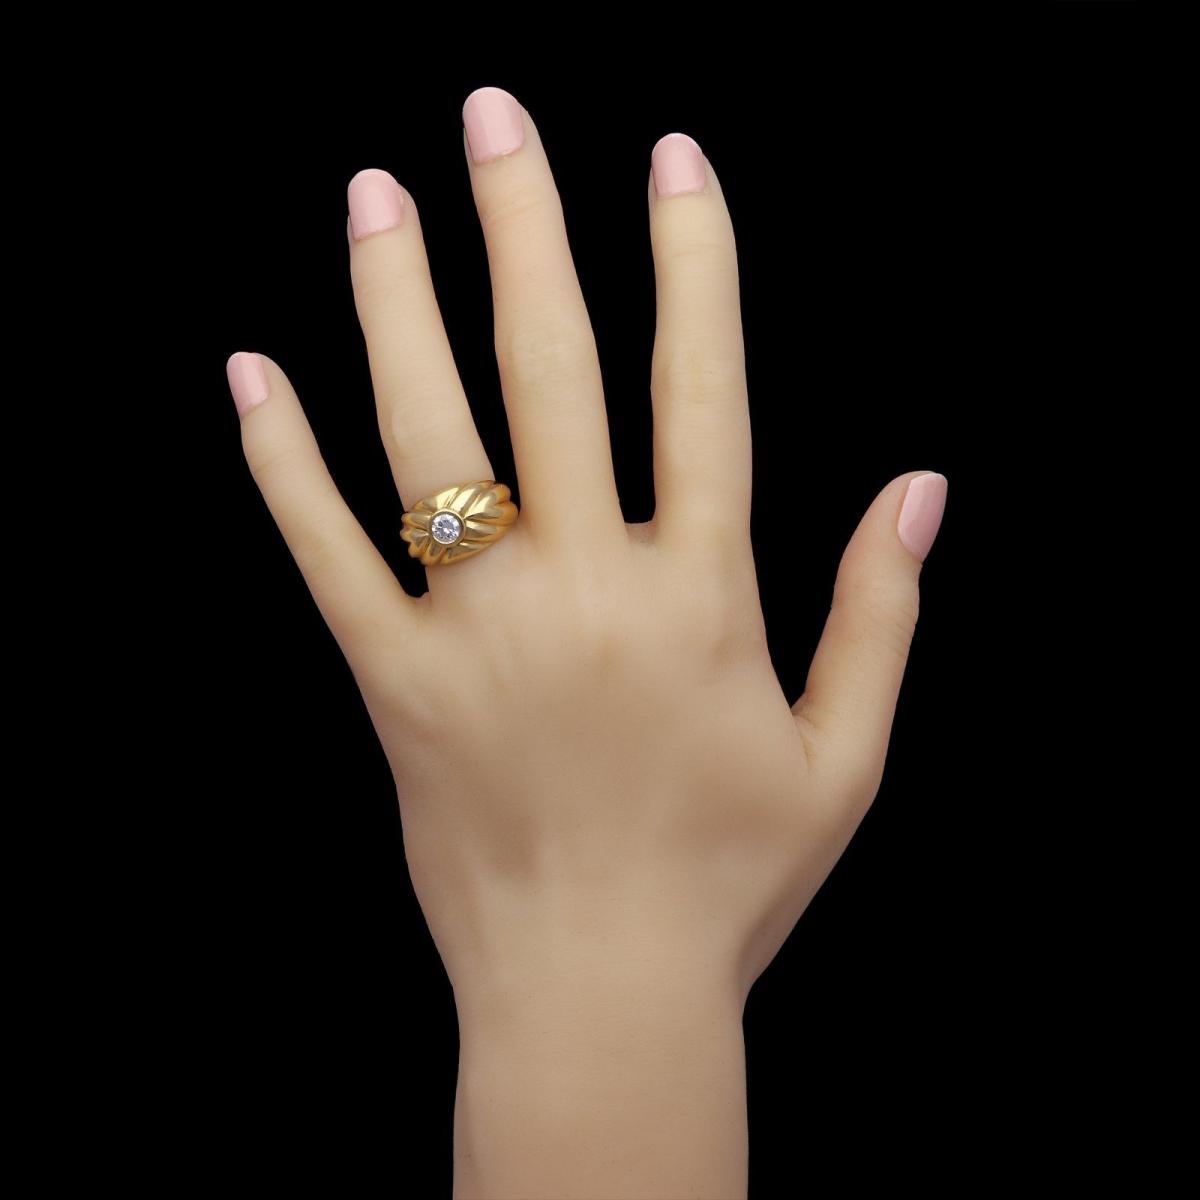 18ct gold and diamond ring by Van Cleef & Arpels